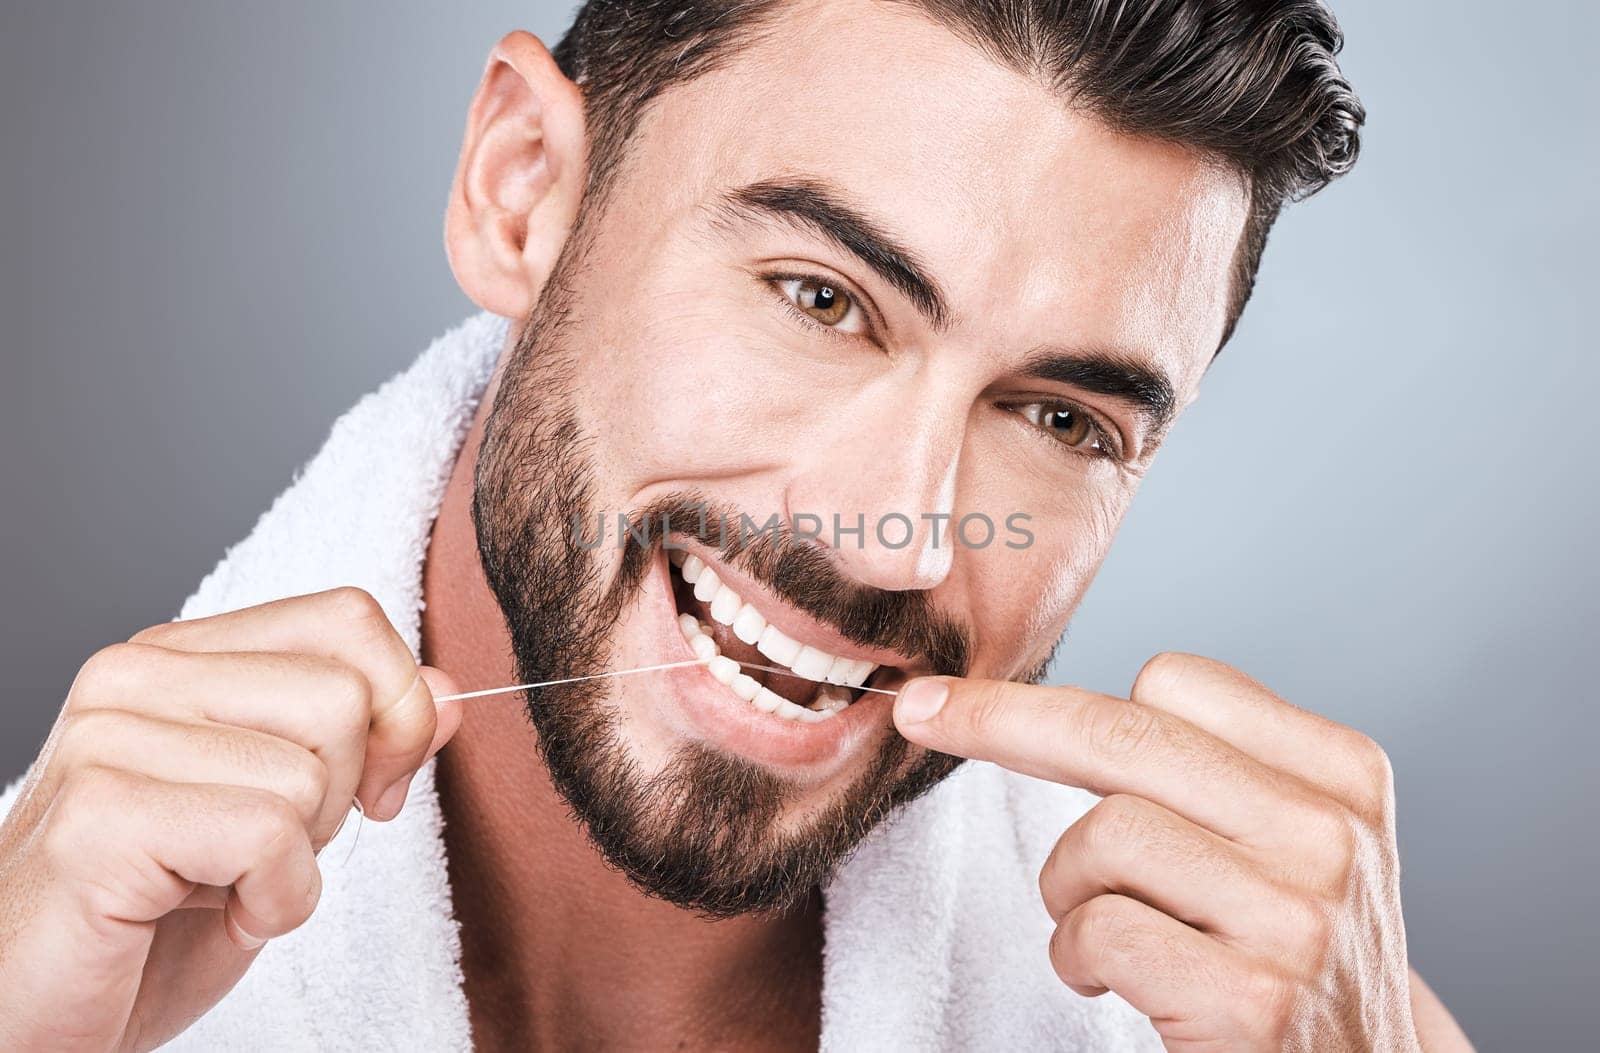 Mouth floss, tooth and man in studio for wellness, healthy body care or hygiene on background. Teeth, flossing and guy with dental cleaning for facial beauty, fresh breath or happy bathroom cosmetics.